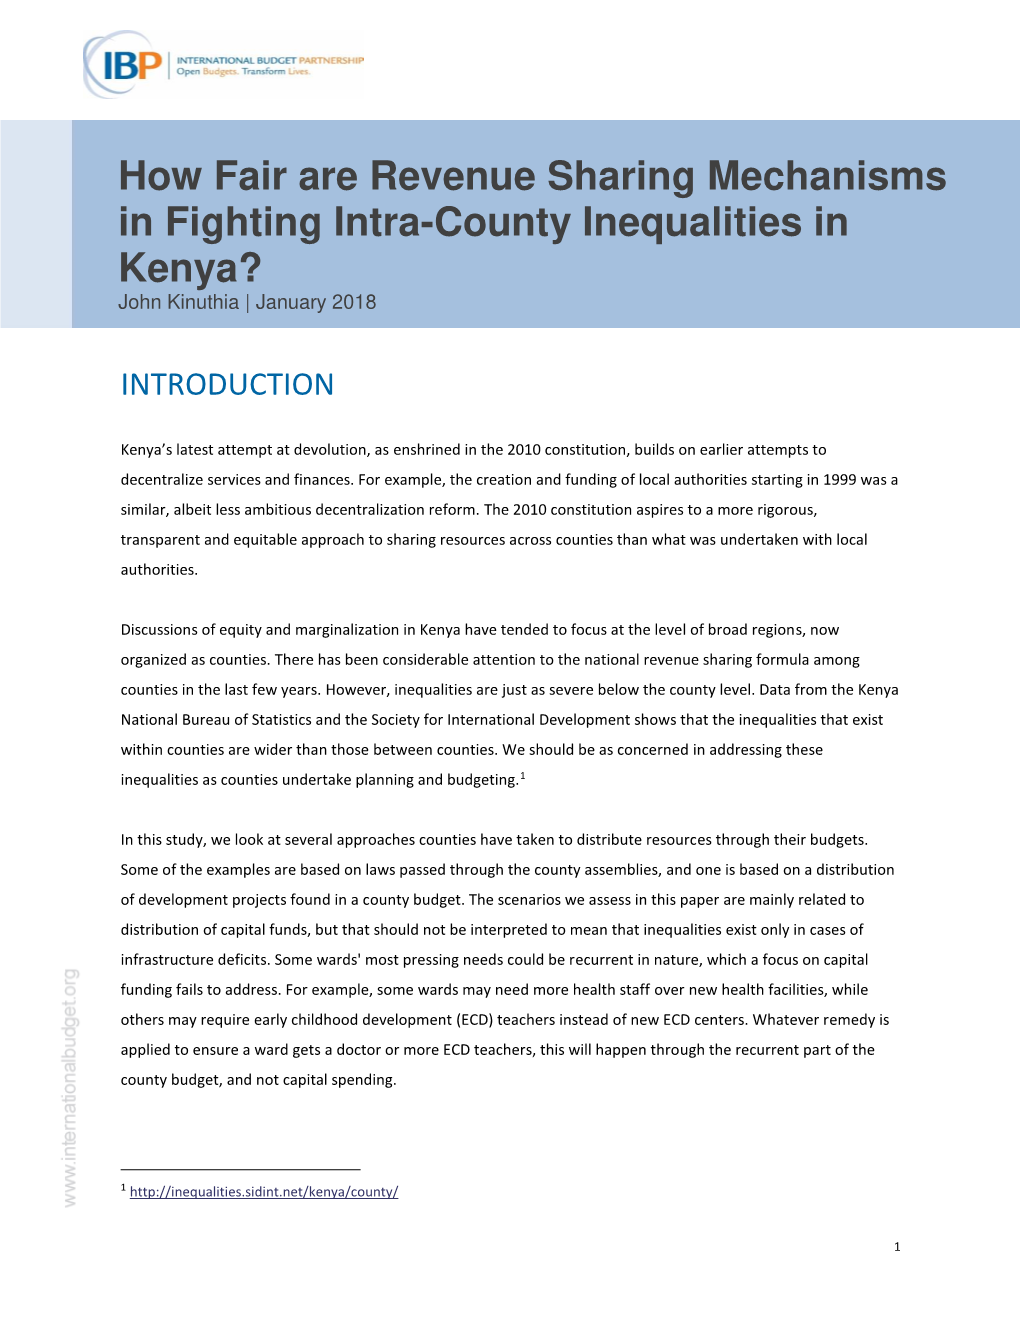 How Fair Are Revenue Sharing Mechanisms in Fighting Intra-County Inequalities in Kenya? John Kinuthia | January 2018